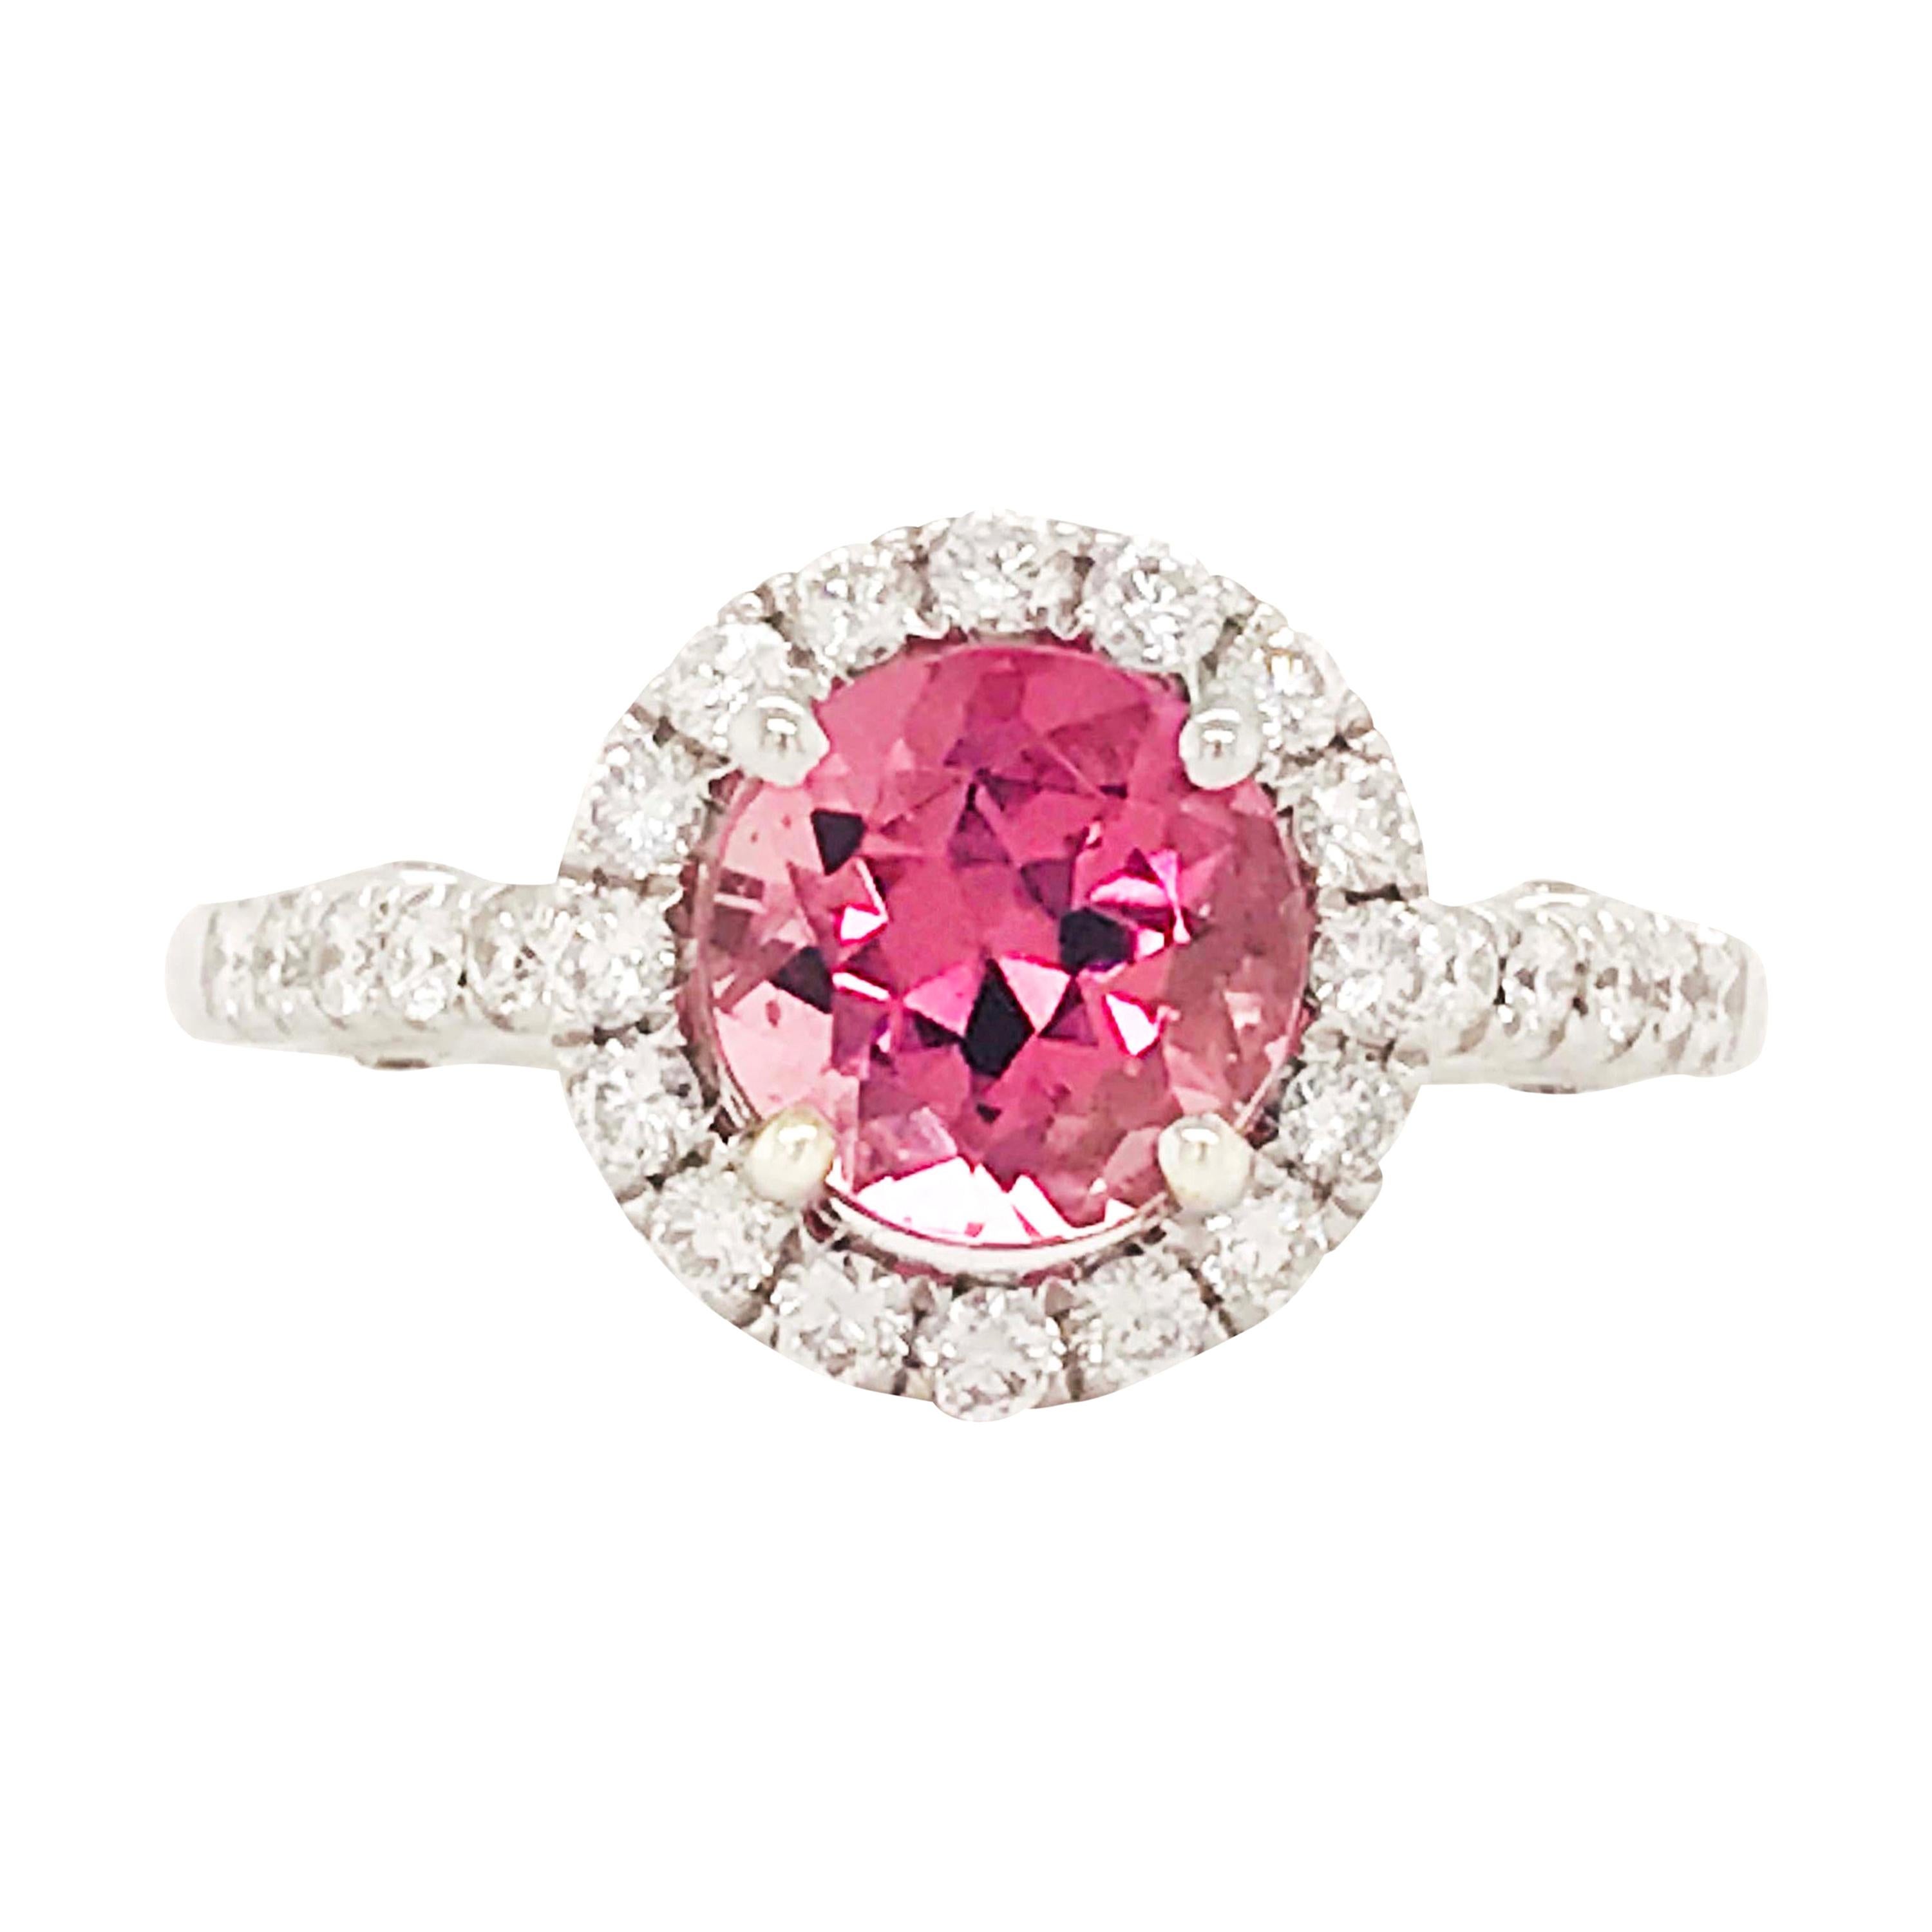 For Sale:  Pink Tourmaline and Diamond Ring, White Gold 2 Carat Diamond and Gem Engagement